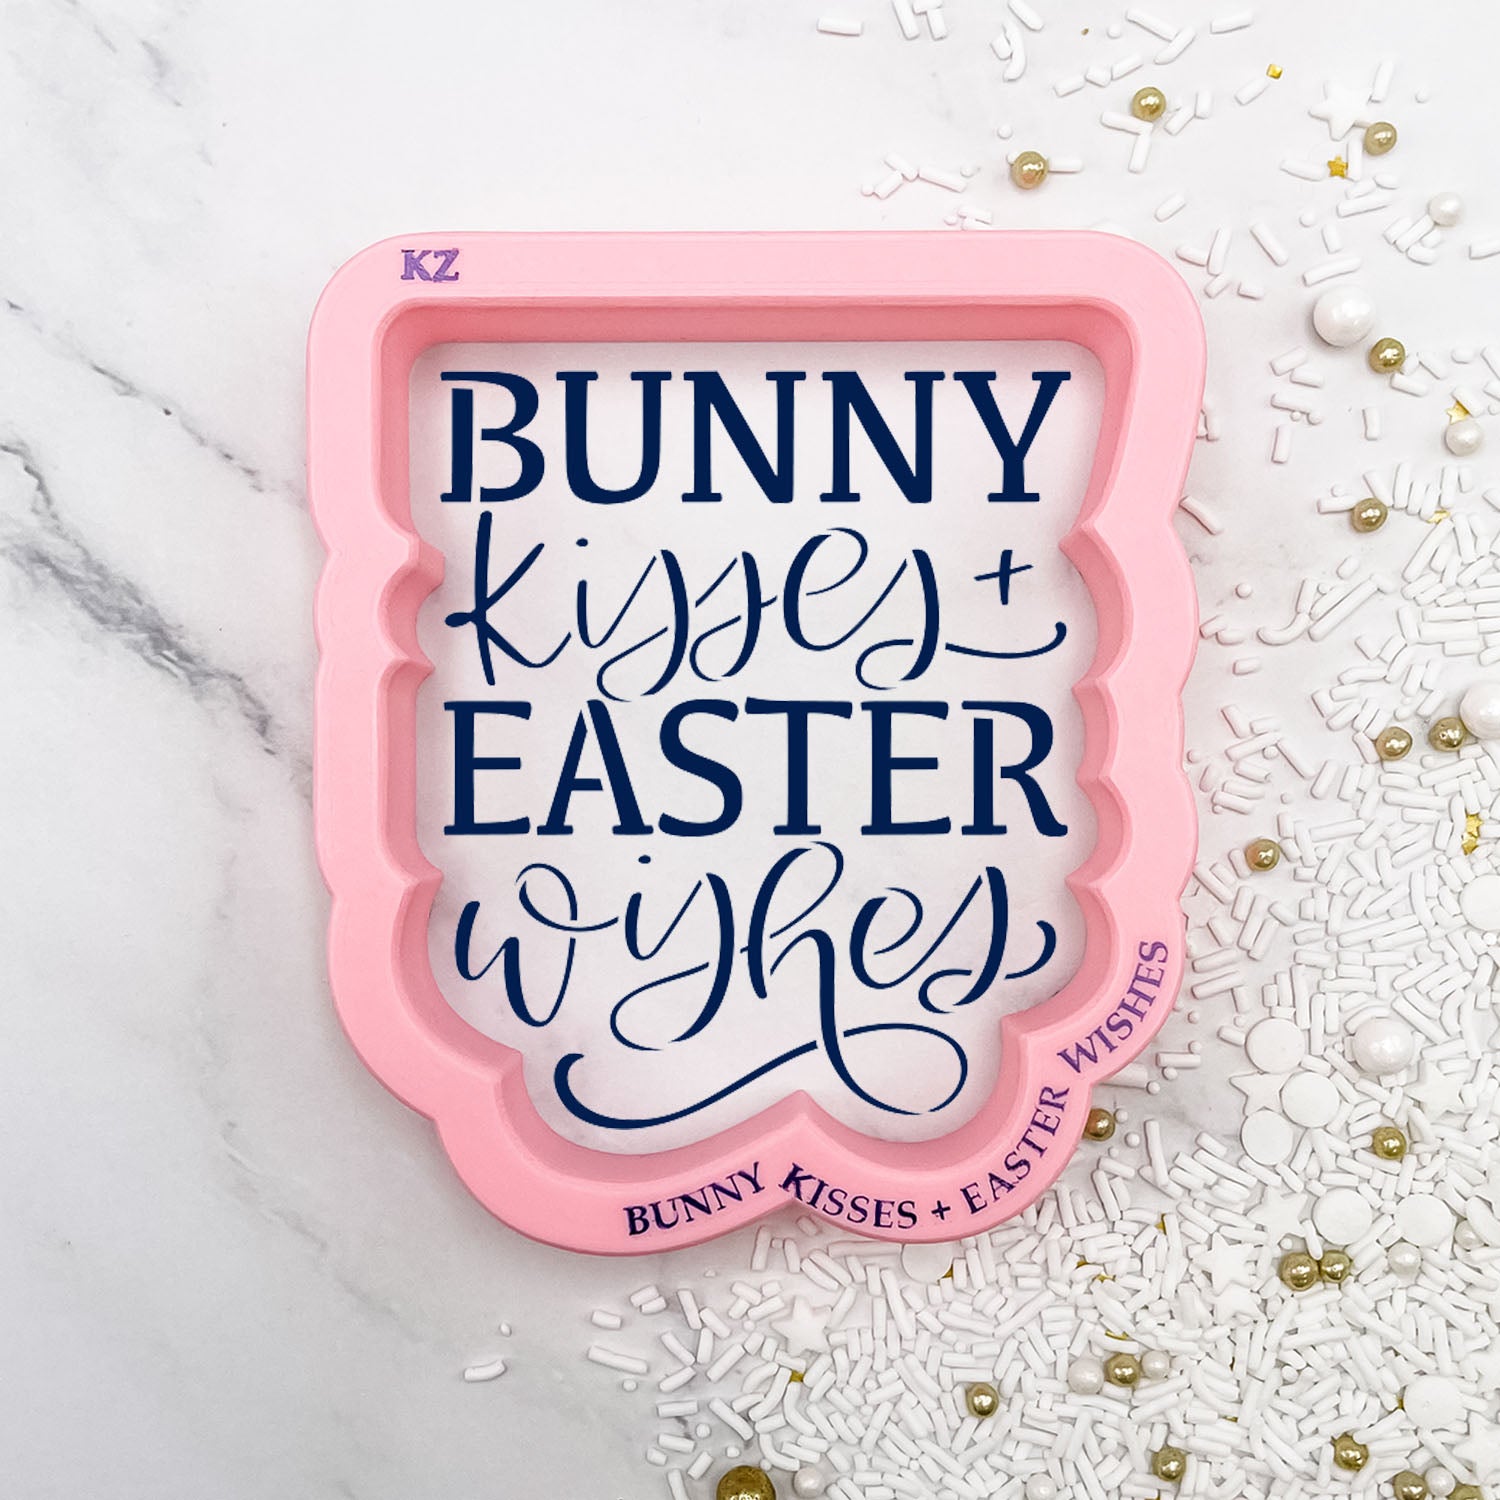 Bunny Kisses + Easter Wishes Hand Lettered